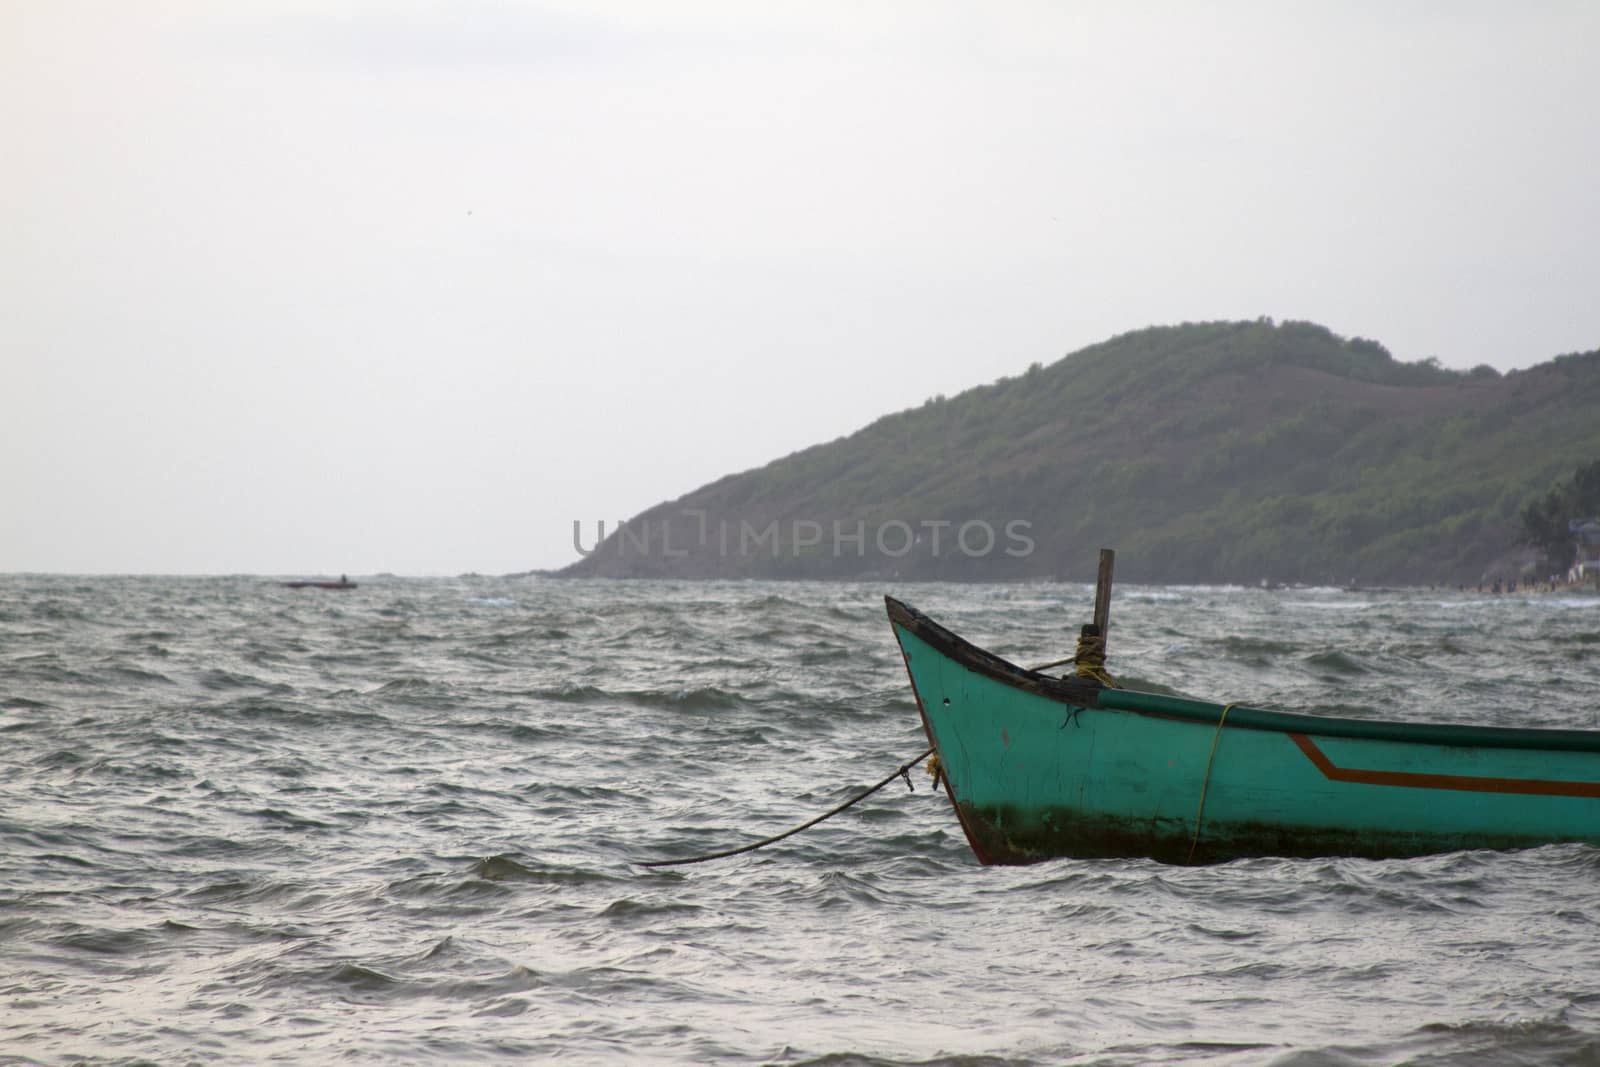 Old fishing boat at sea. India, Goa by mcherevan